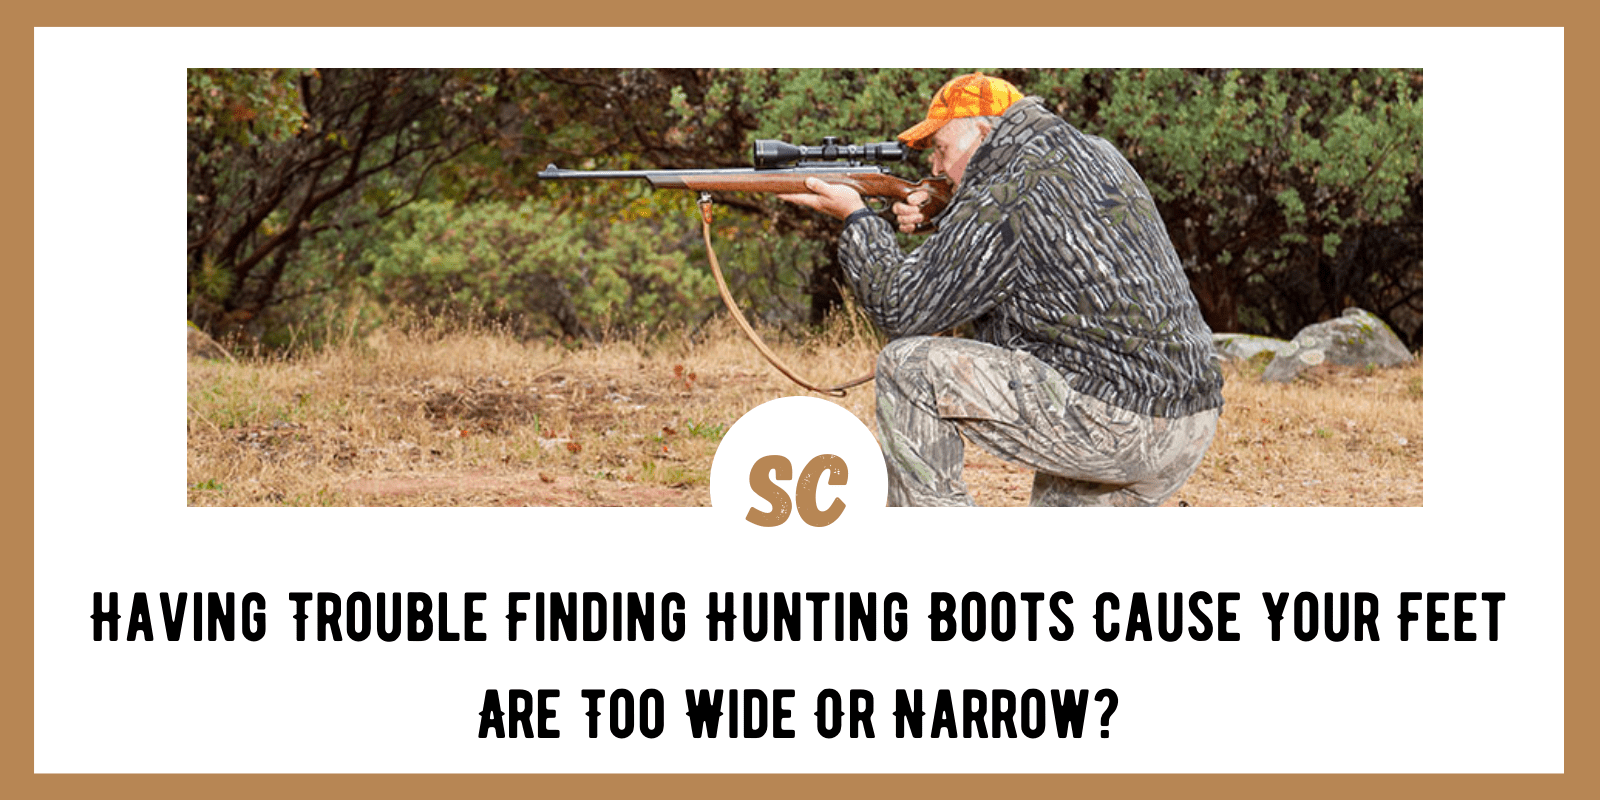 Having Trouble Finding Hunting Boots Cause Your Feet Are Too Wide Or Narrow?